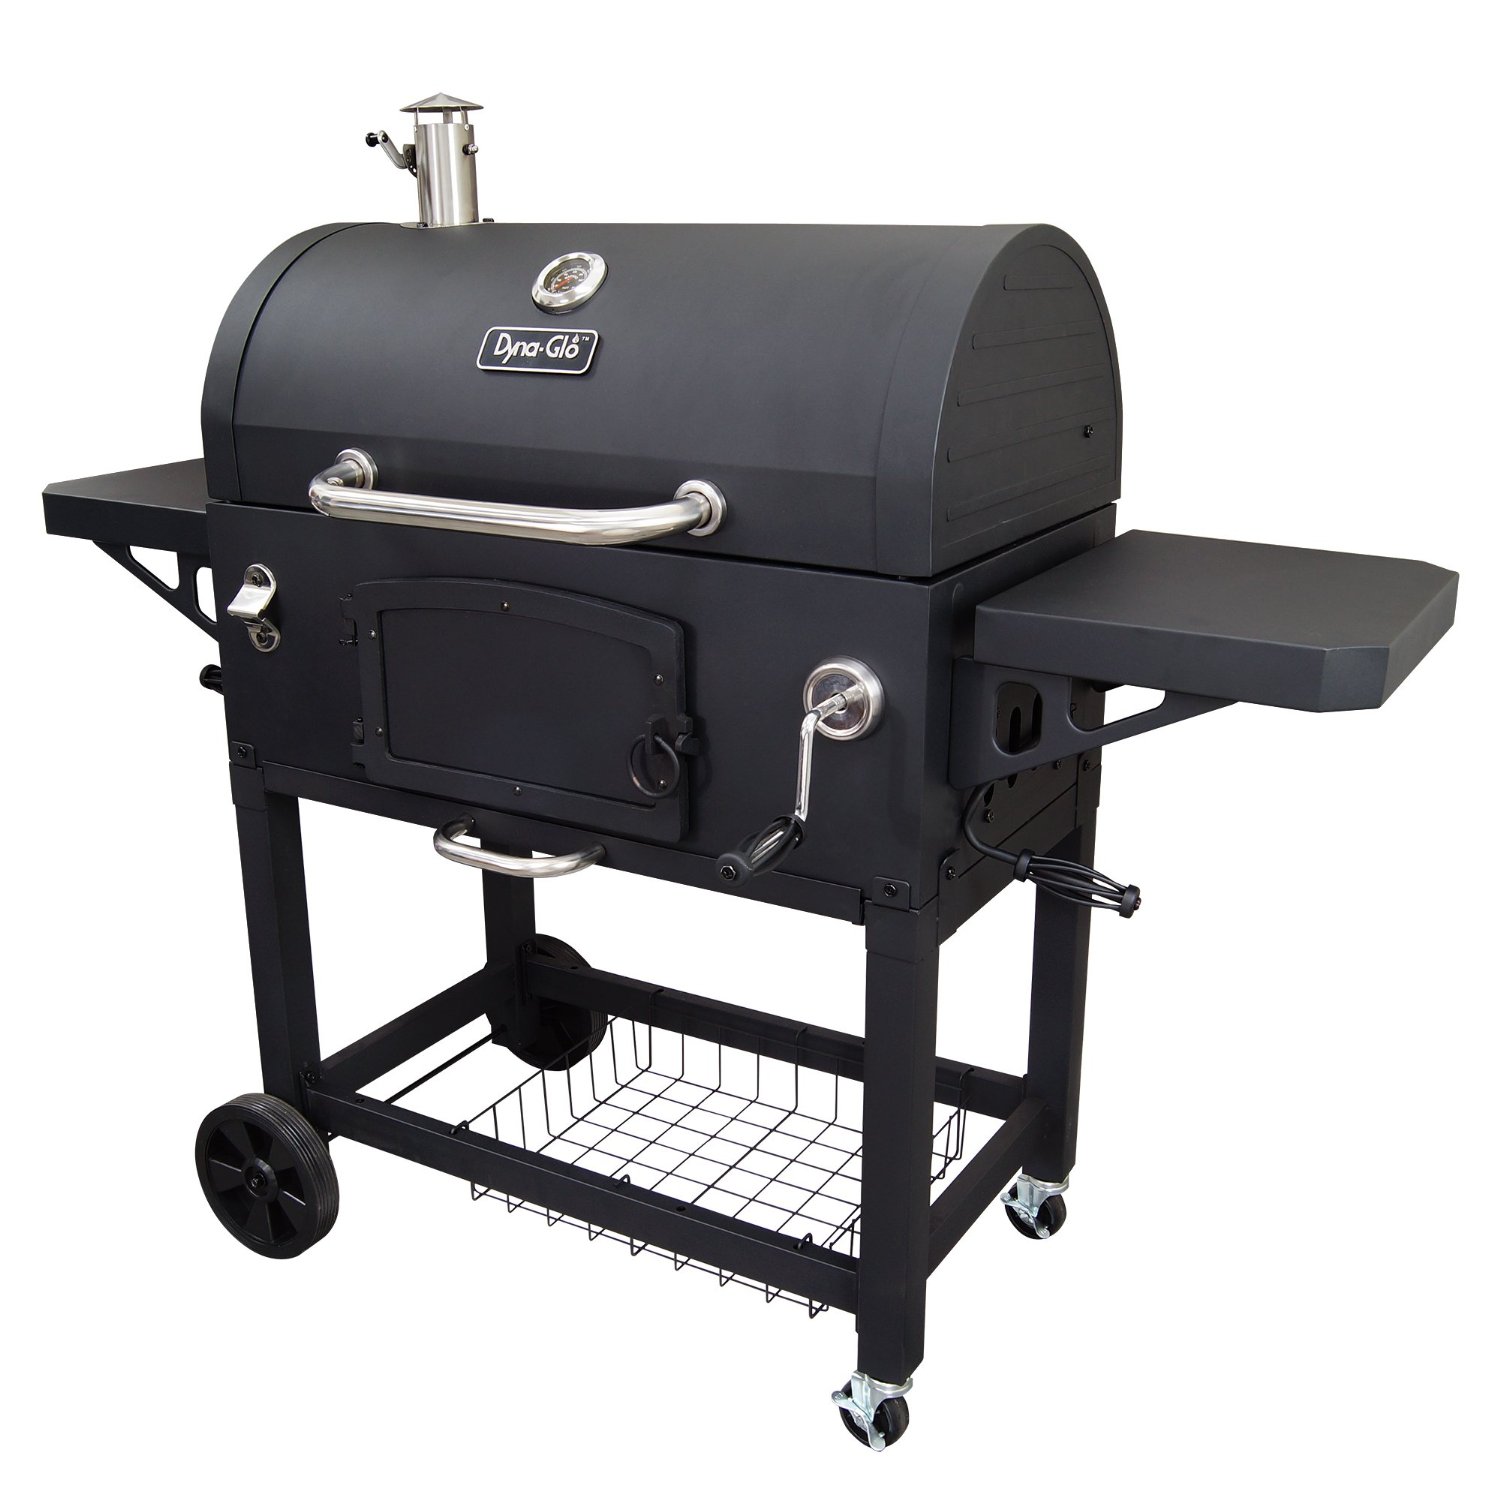 Top 10 Best Charcoal Grills 2018 - Home & Outdoor Charcoal Grill reviews